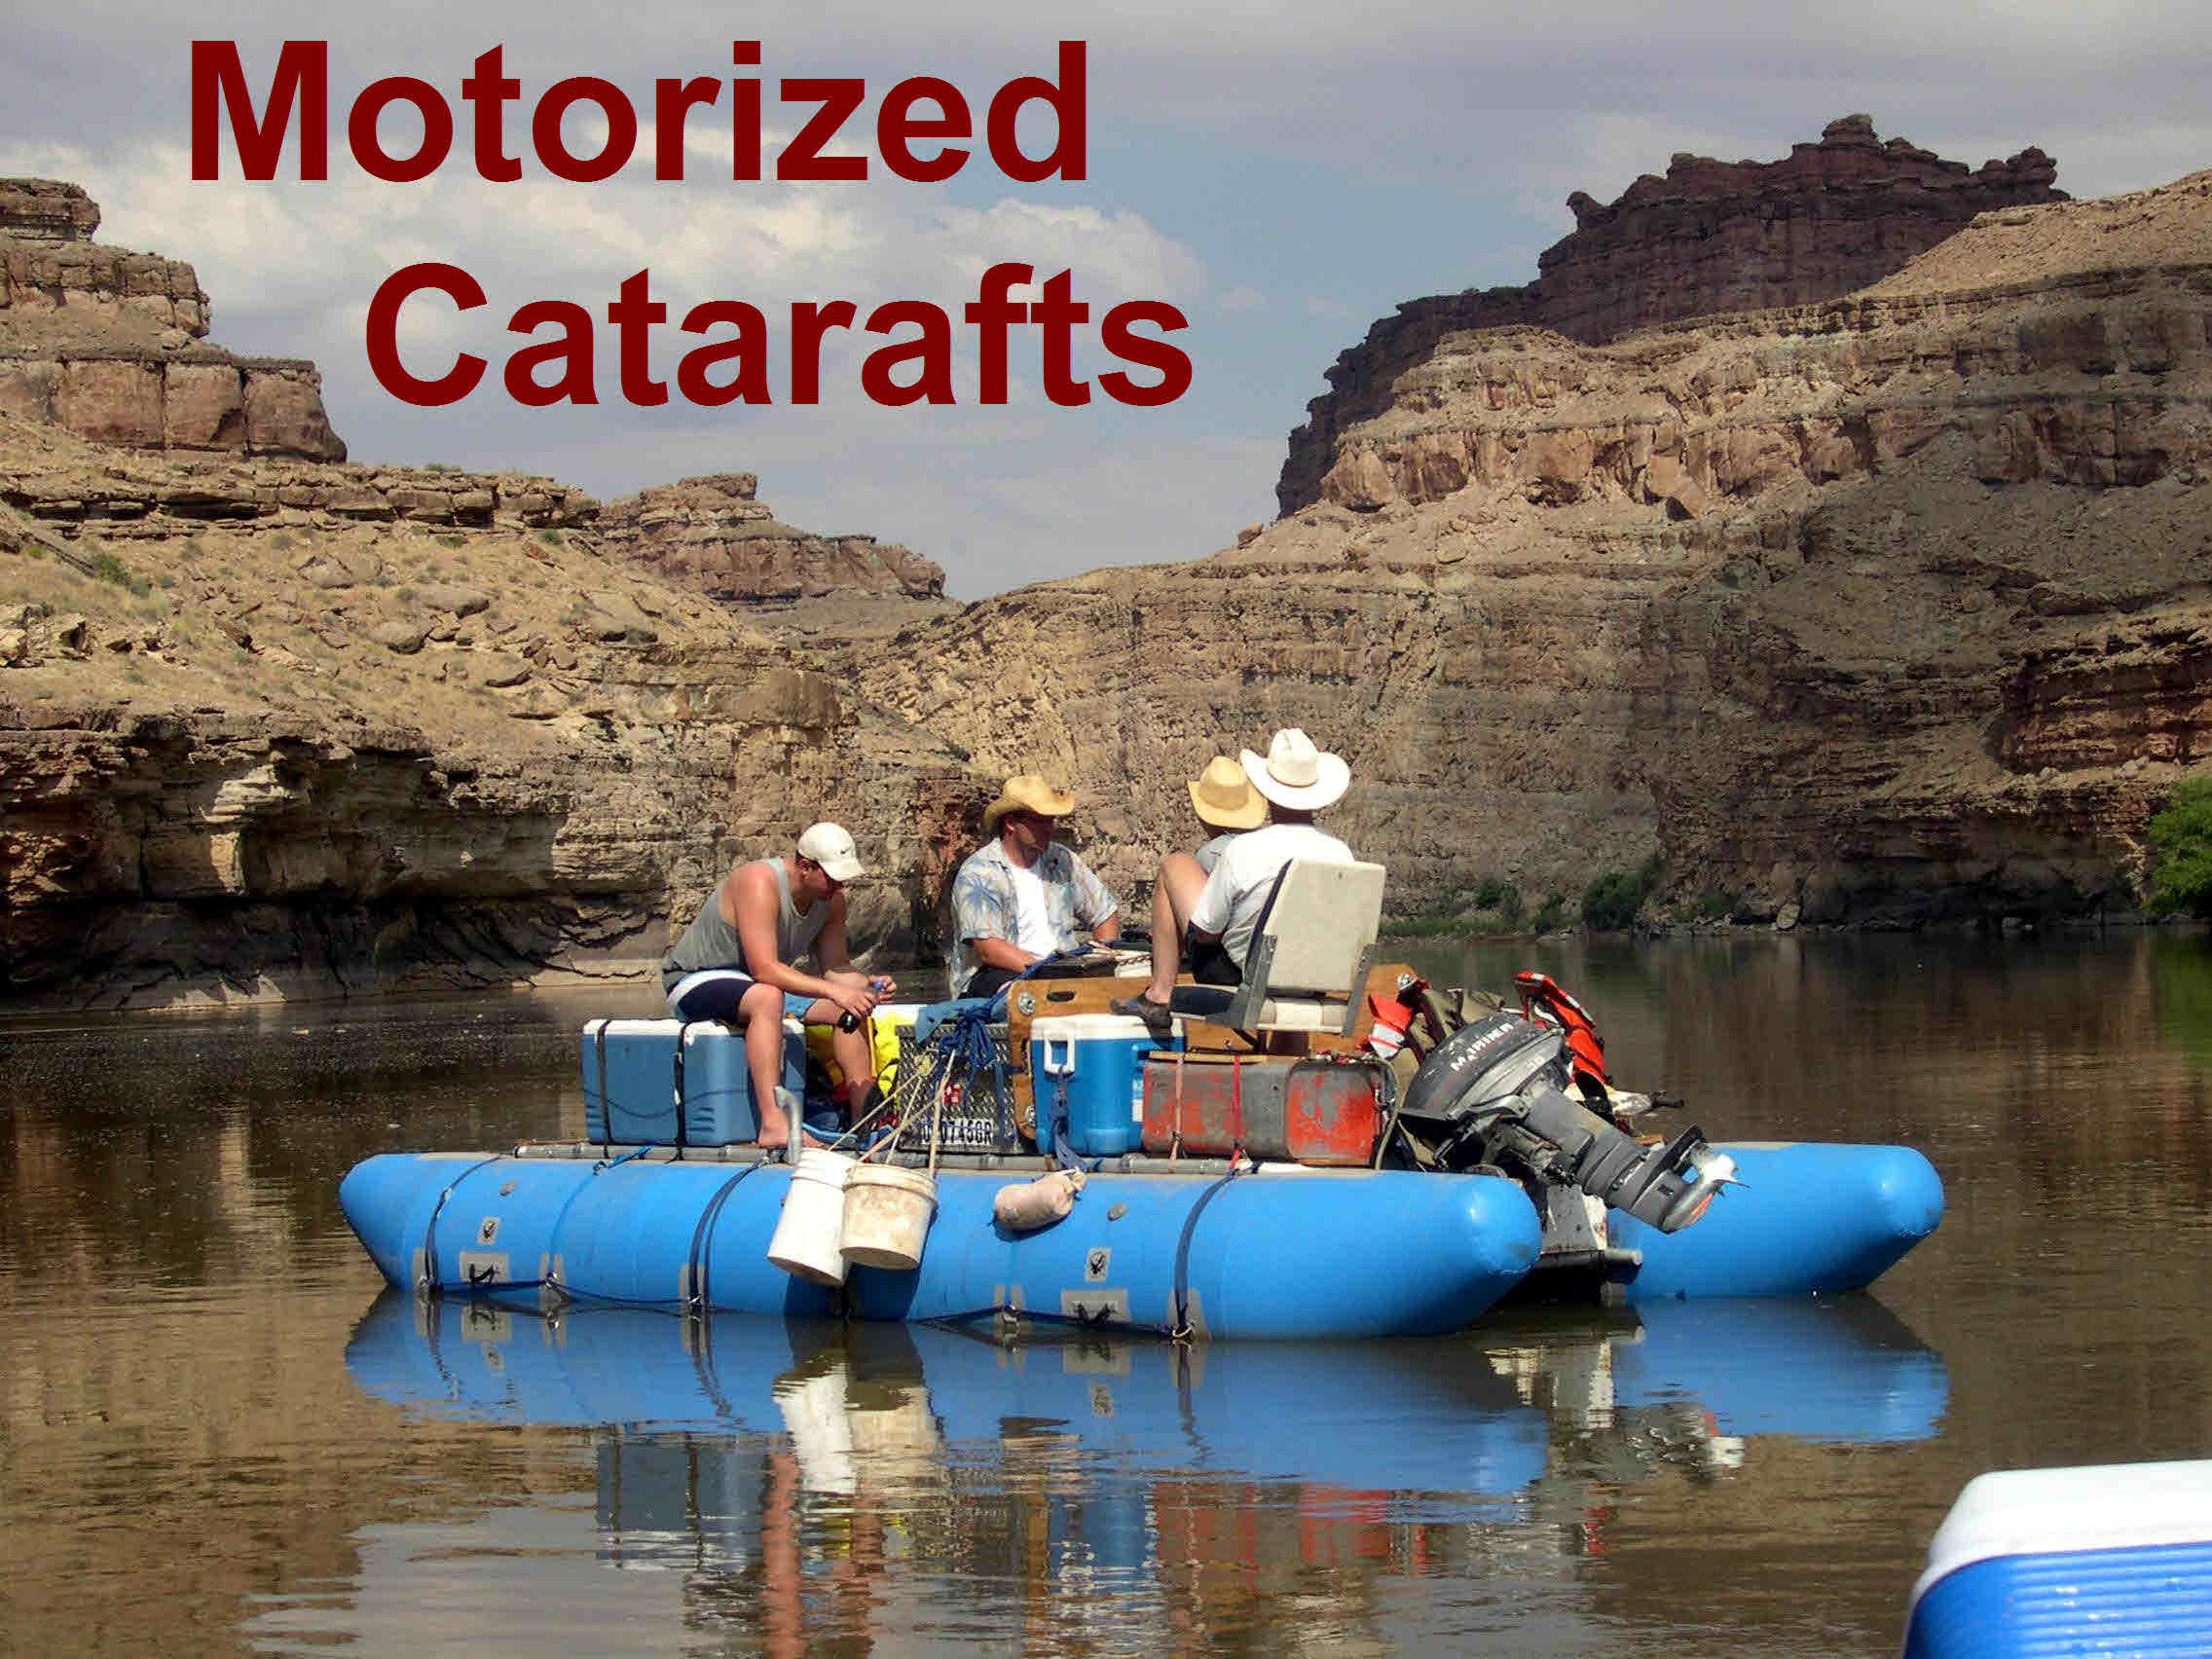 expedition catarafts with motors